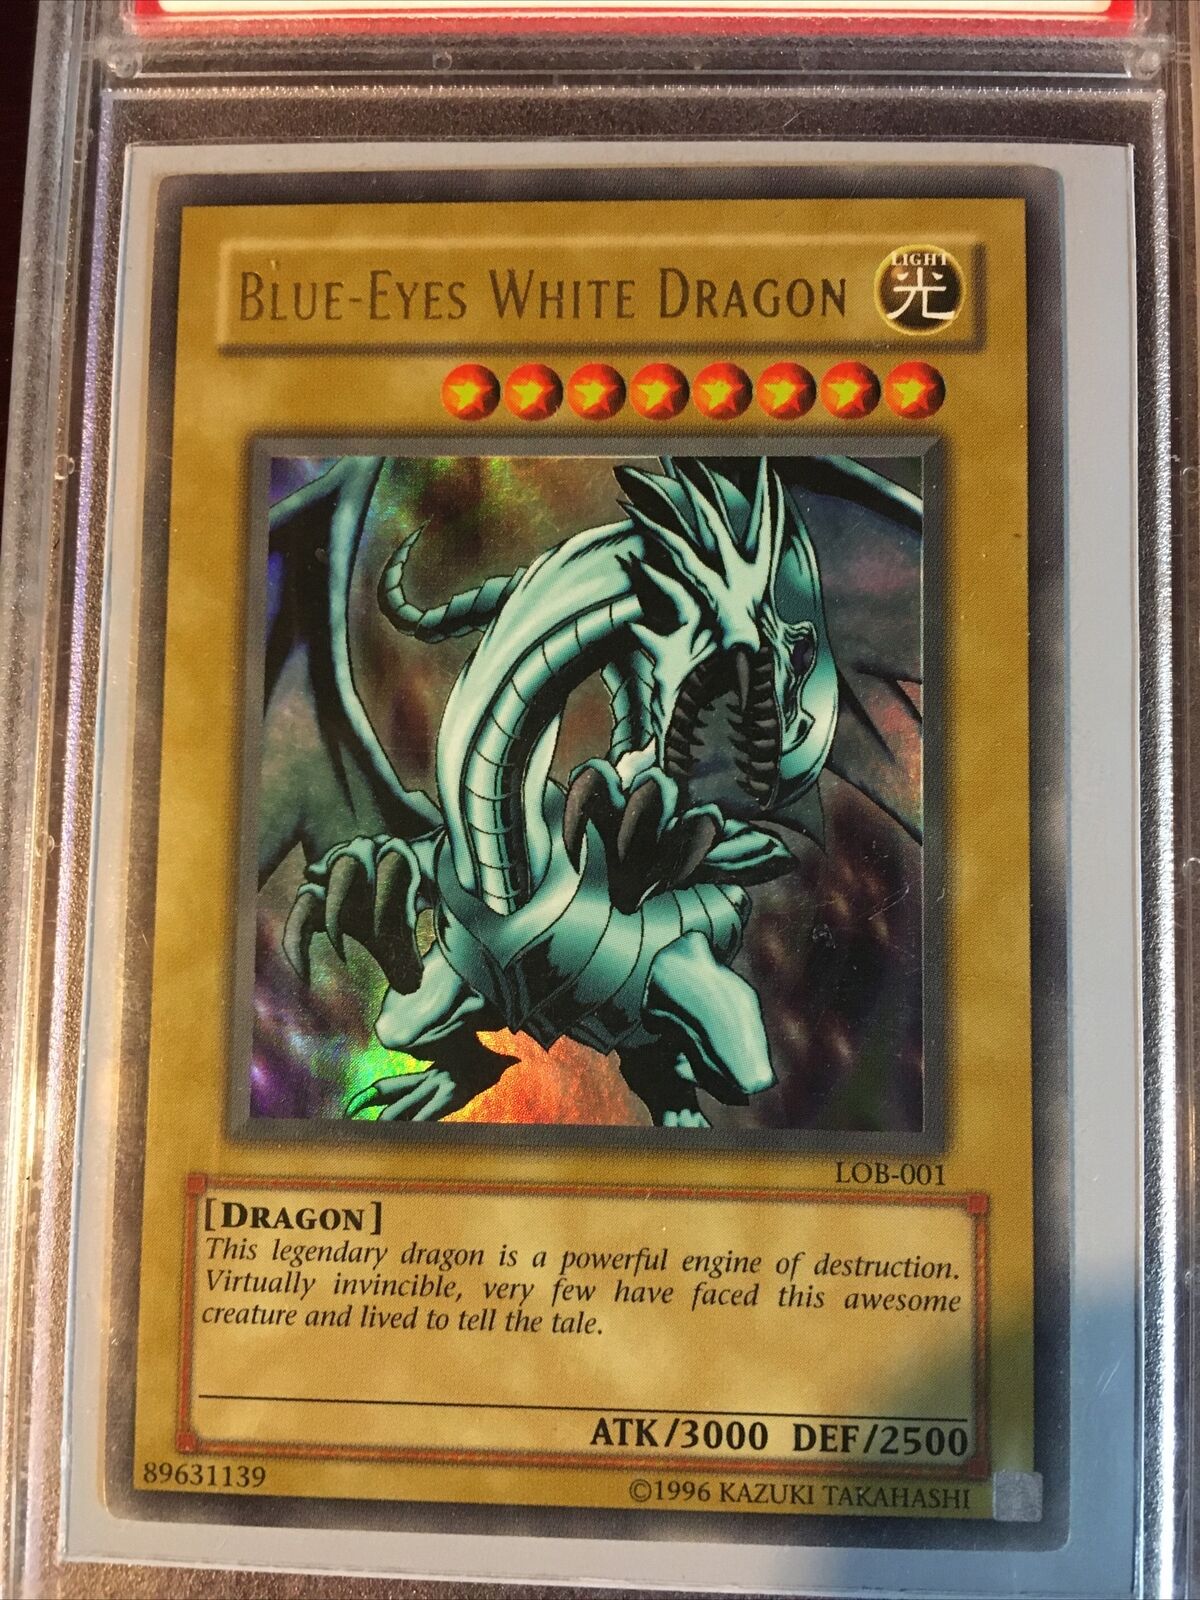 Yugioh Ultra Rare Unlimited Blue Eyes White Dragon LOB-001 - MINT CONDITION